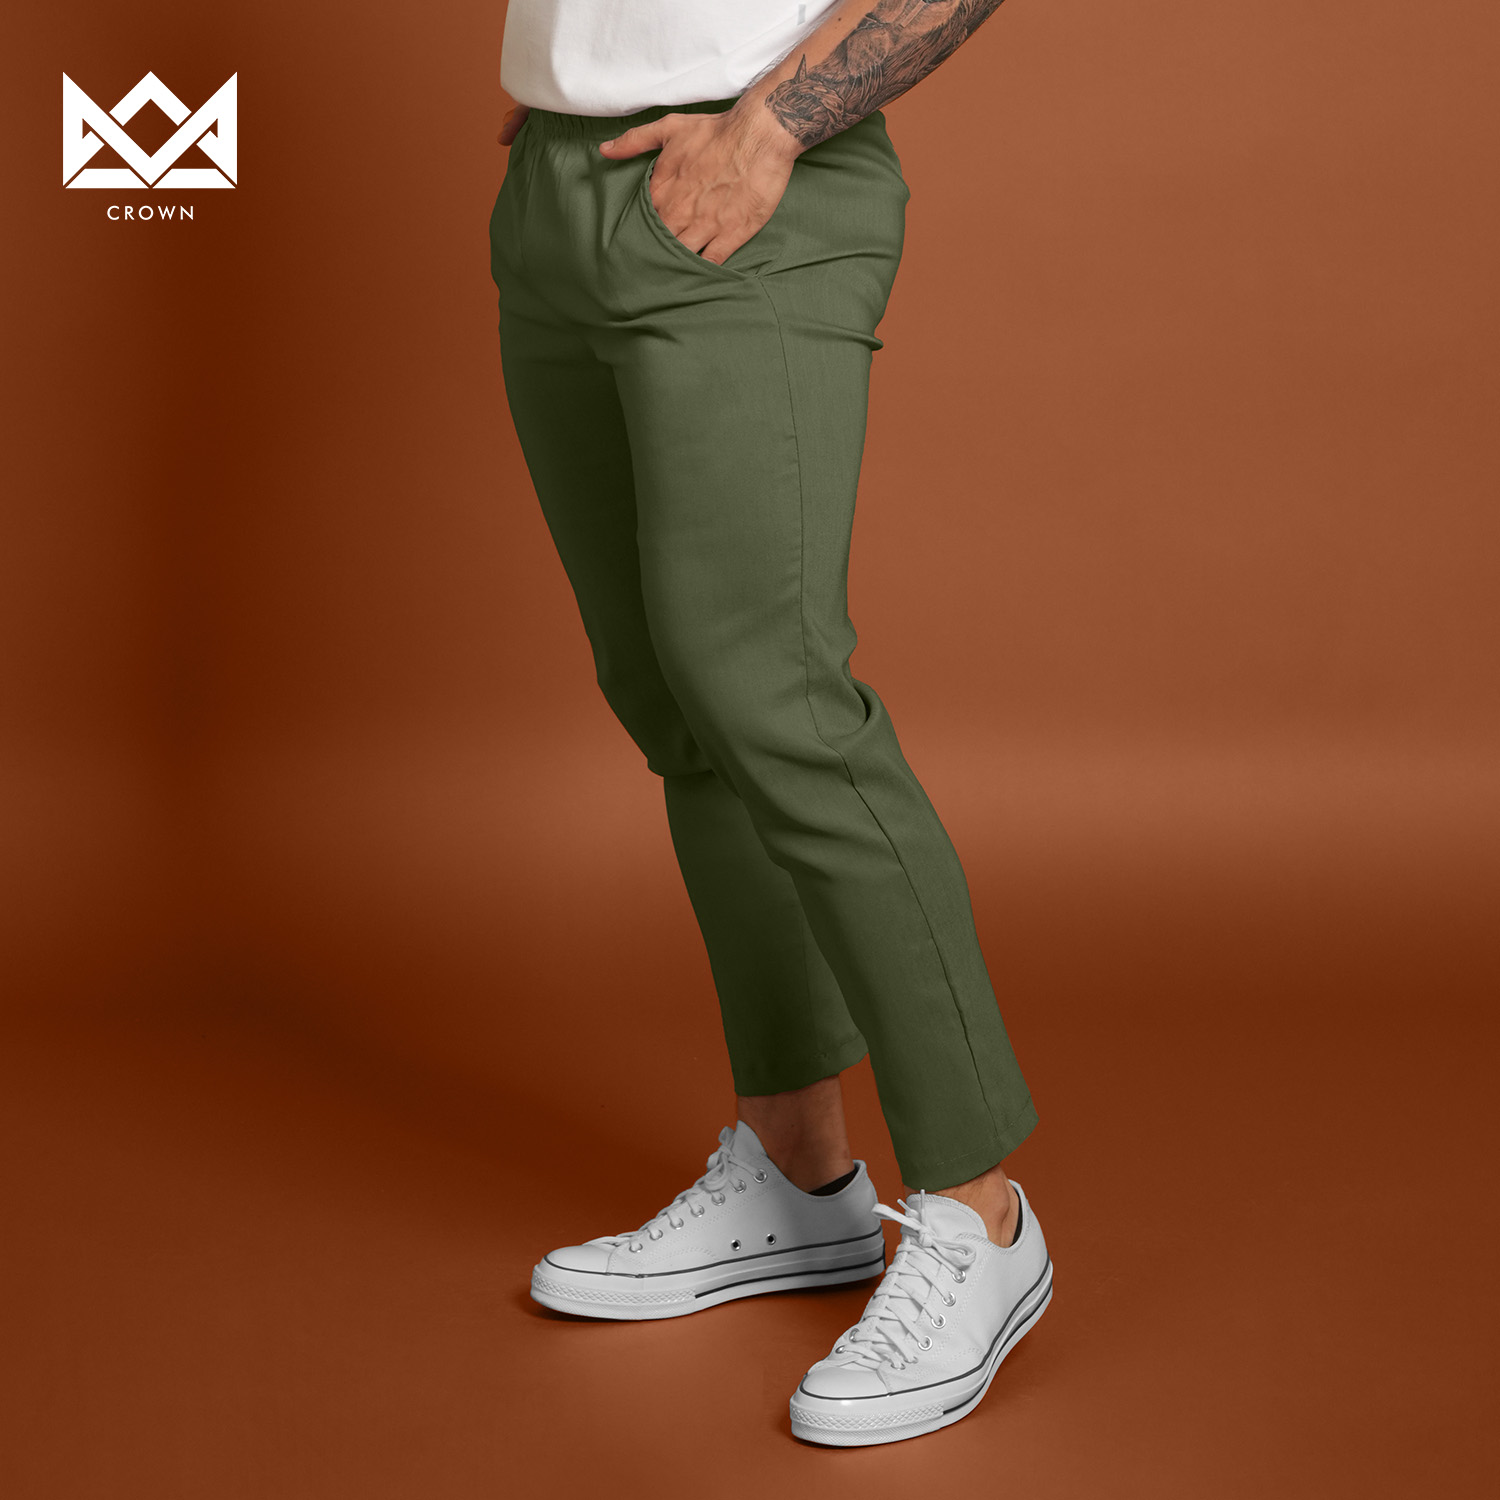 Crown Trouser Pants for Men with Pockets and Drawstring